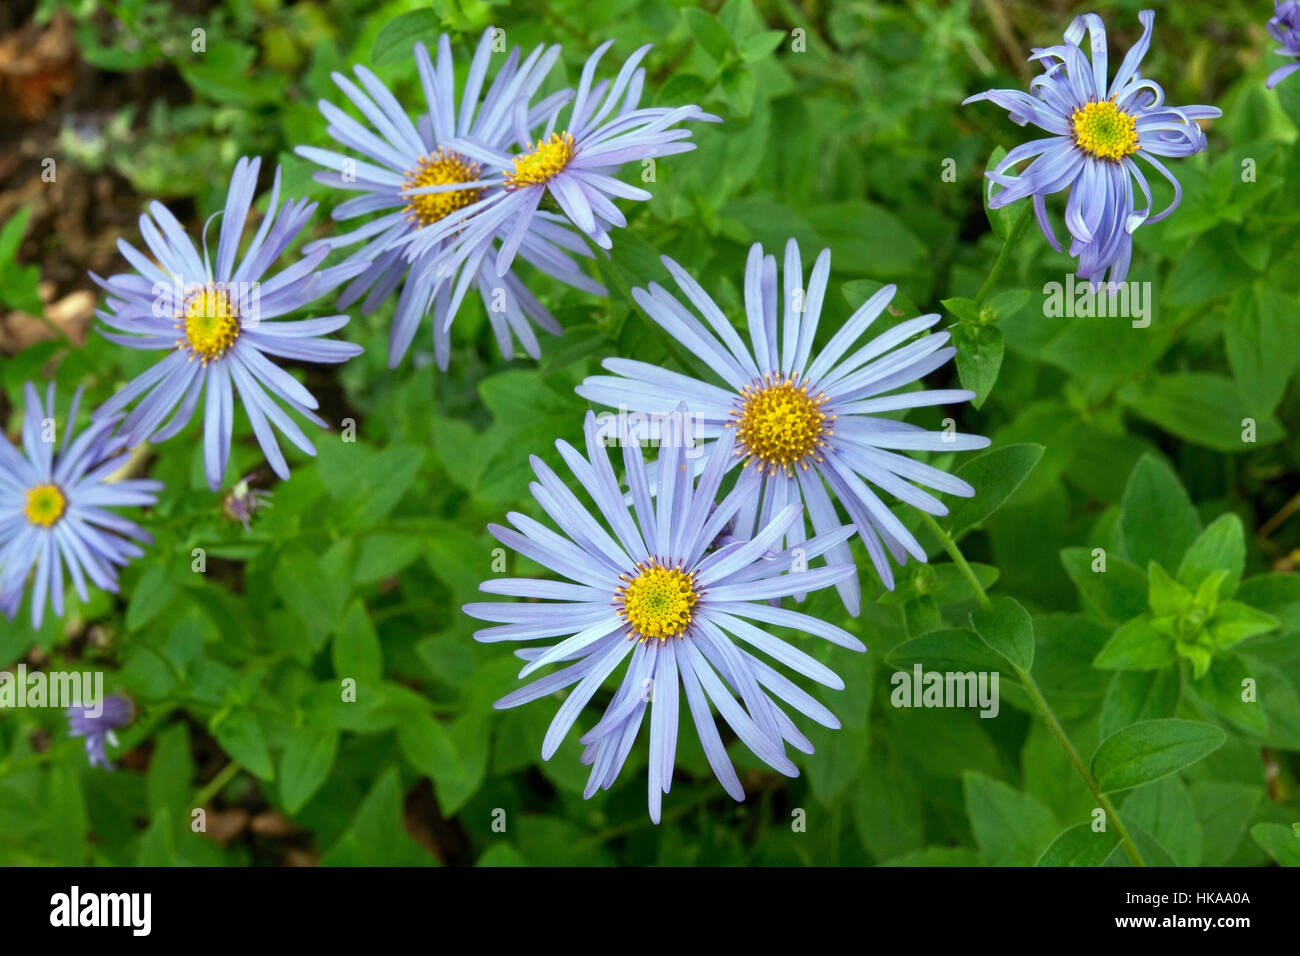 Aster x frikartii 'Monch' Stock Photo